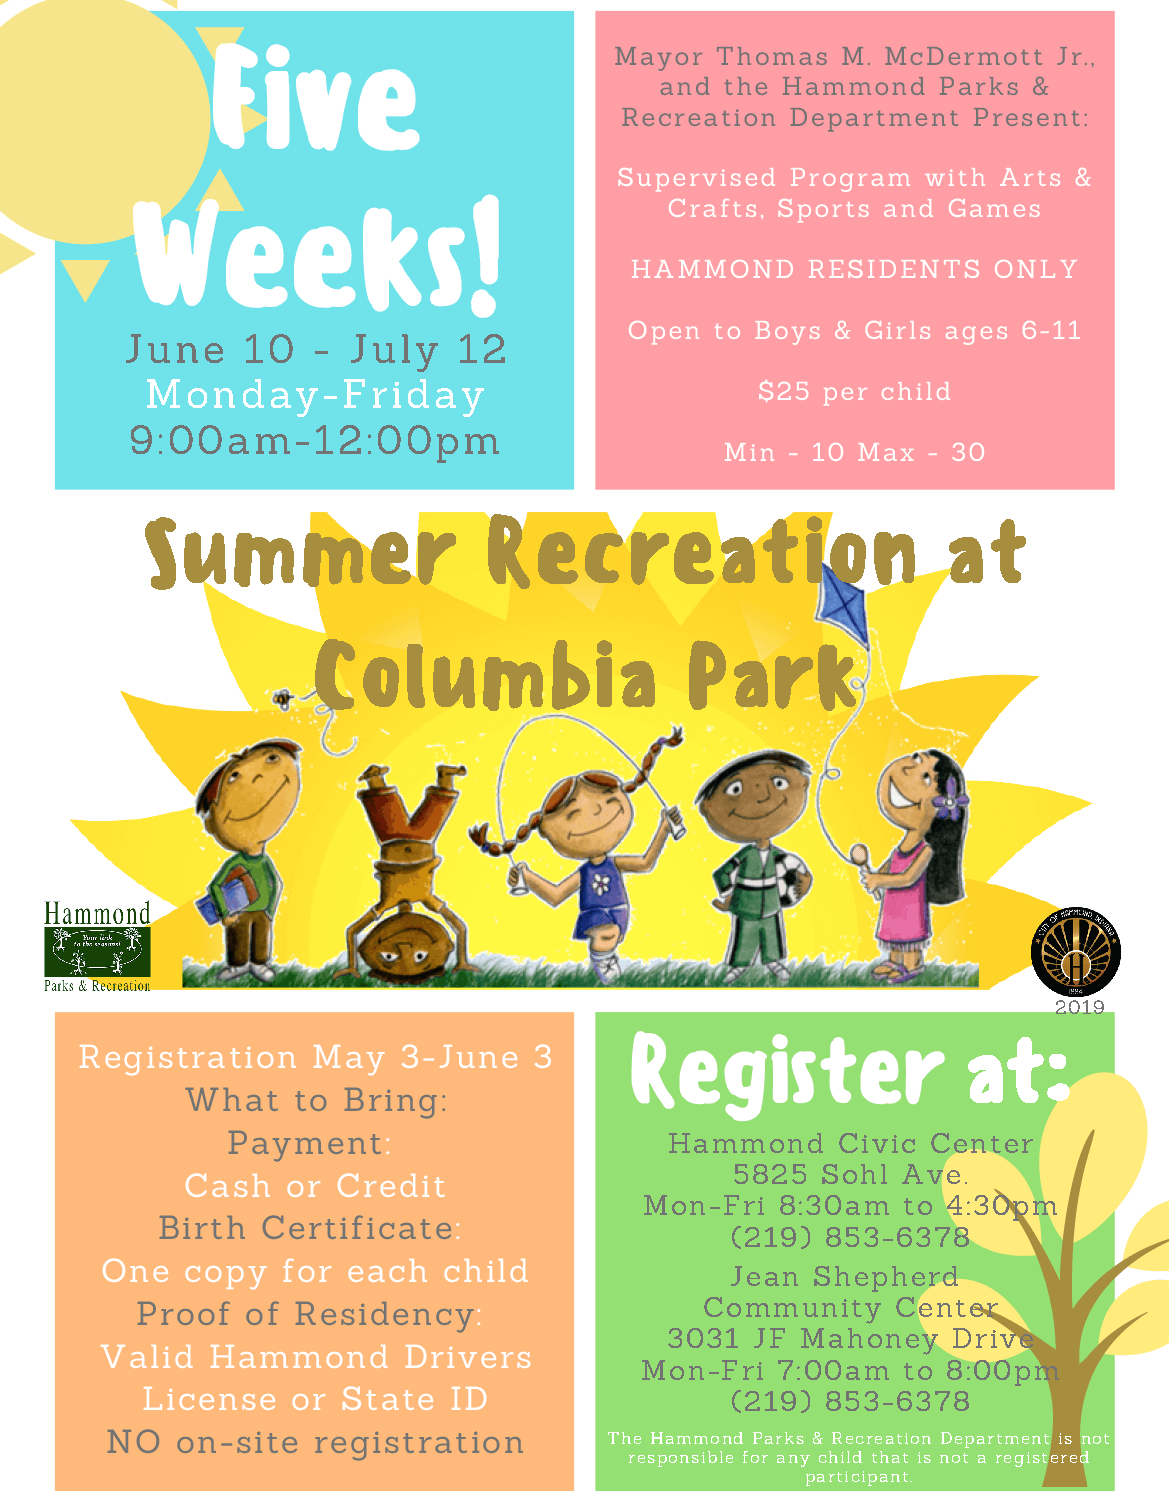 Mayor Thomas M. McDermott, Jr. and Hammond Parks & Recreation present: Summer Recreation 2019, a supervised program with Arts & Crafts, Sports and Games.